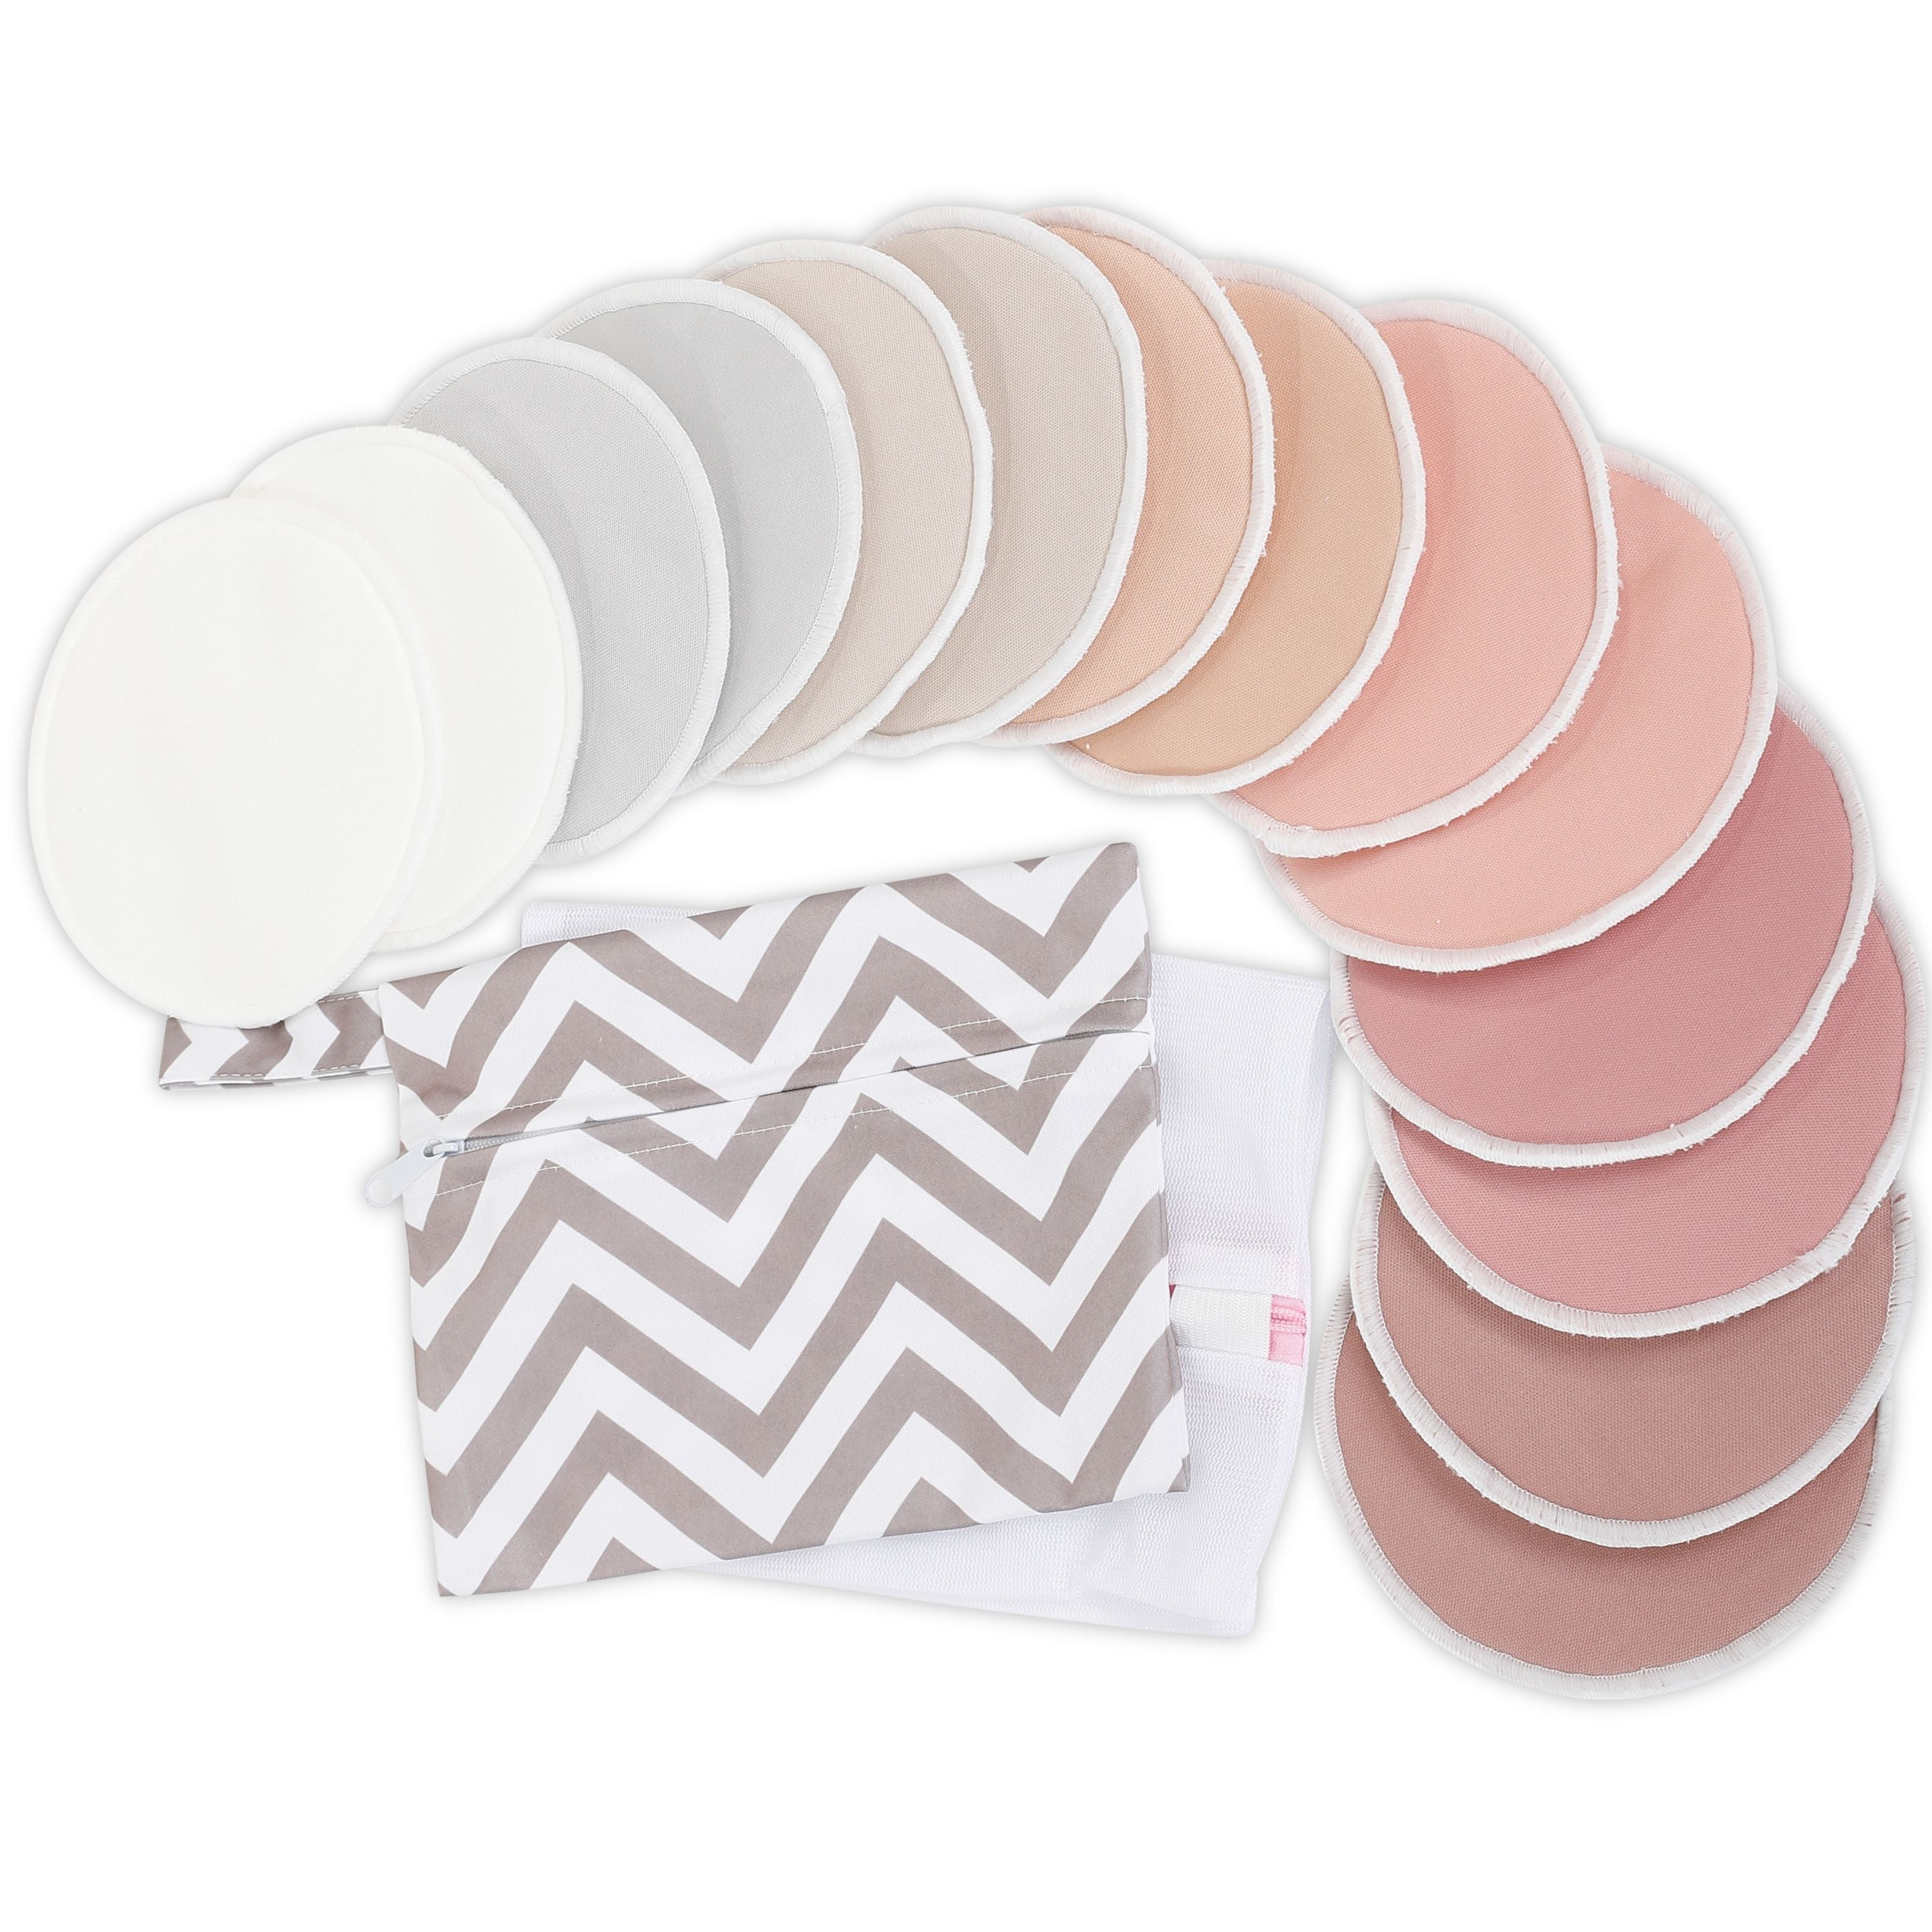 12 Pack Enovoe Organic Bamboo Breastfeeding Pads Reusable Nursing Pads for Breast are Super Soft with Laundry Bag Machine Washable and Hypoallergenic